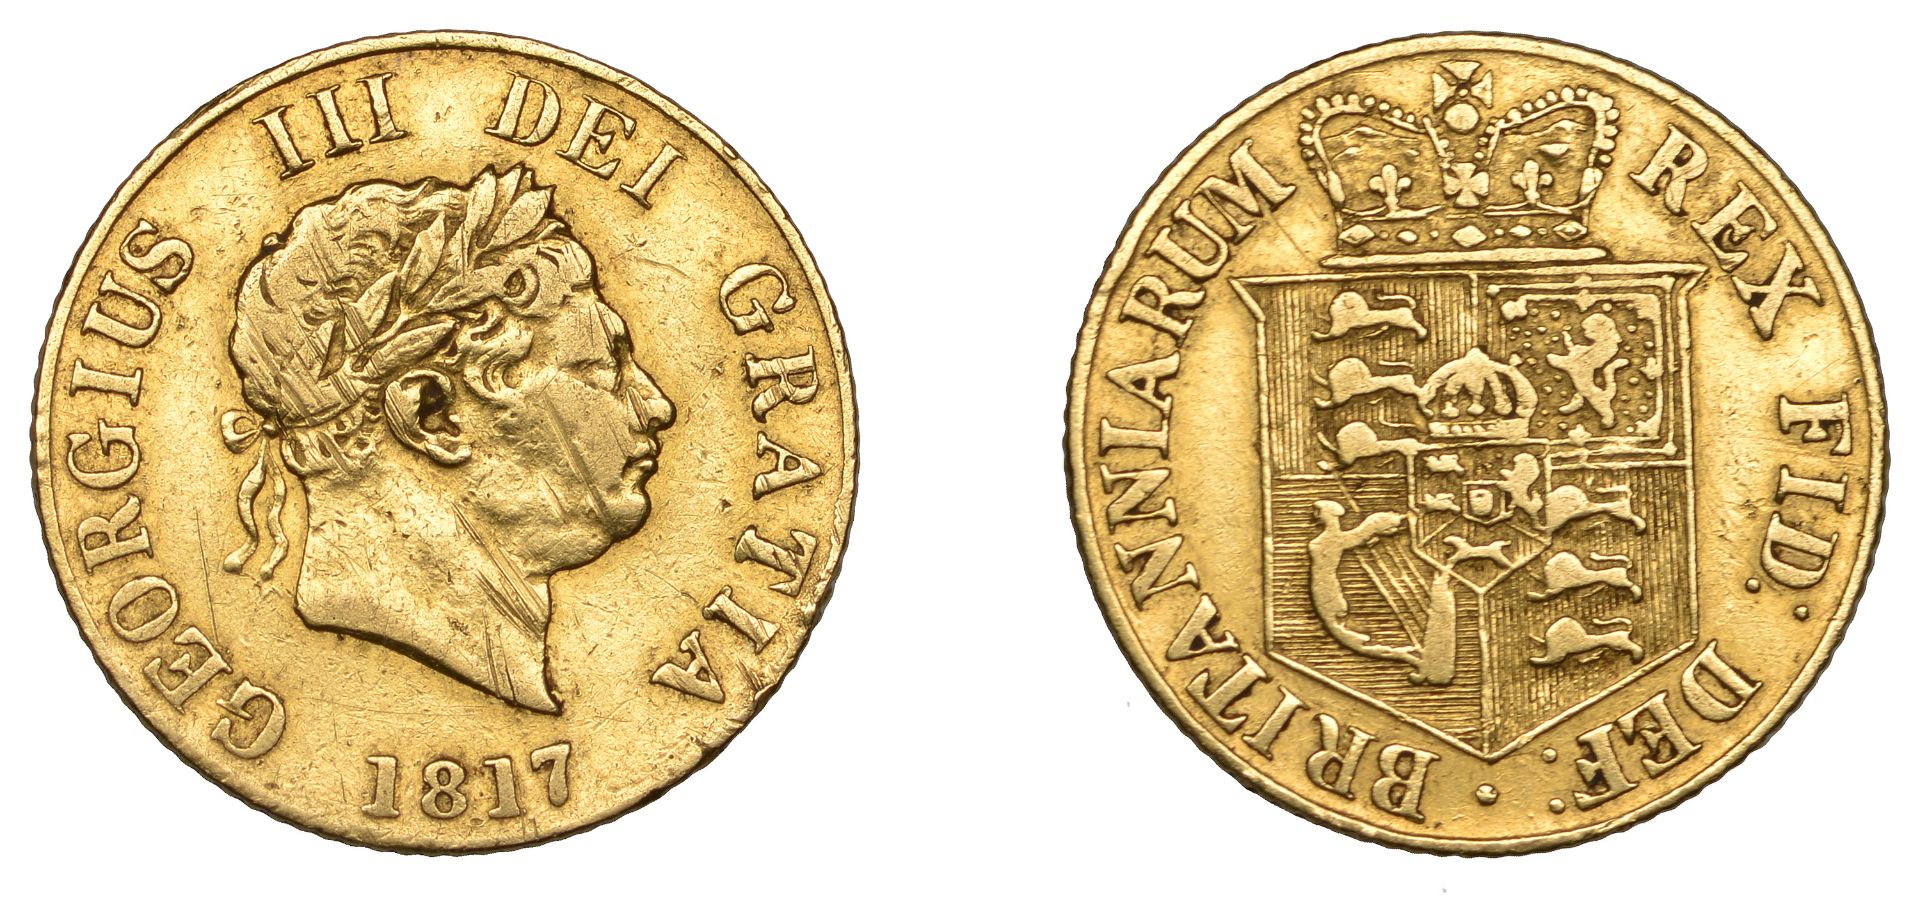 George III (1760-1820), New coinage, Half-Sovereign, 1817 (M 400; S 3786). Light scrapes on...